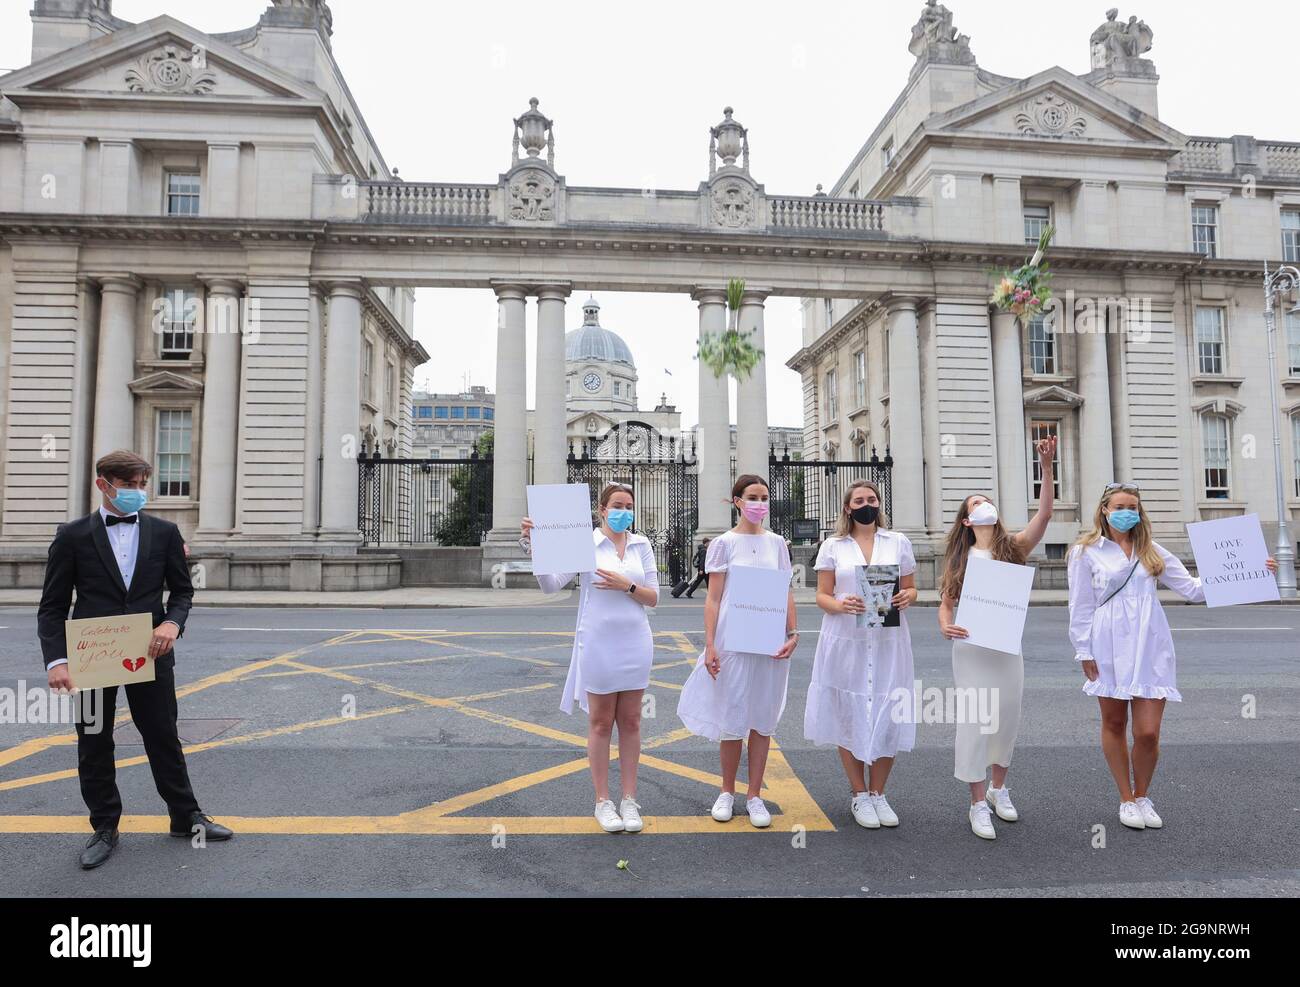 Dublin, Ireland, 27/07/2021. Brides to Be, protest outside Government Buildings in Dublin, Ireland, over restricted guest numbers at weddings due to Covid-19 restrictions. Pictured are “Groom” Tony Hogan with (l to r) Orla Hogan, Ali O'Mara, Brina Cullen, Anna Killeen, Orla O’Huadhaigh as a group of brides-to-be outside Government Buildings to present their health & safety guidelines in a bid to allow their weddings go ahead this year. The centrepiece of the 40 pages of guidelines is to seek to safely raise the guest limit for wedding receptions to 100 guests from August. Photograph: Sam Boal/ Stock Photo